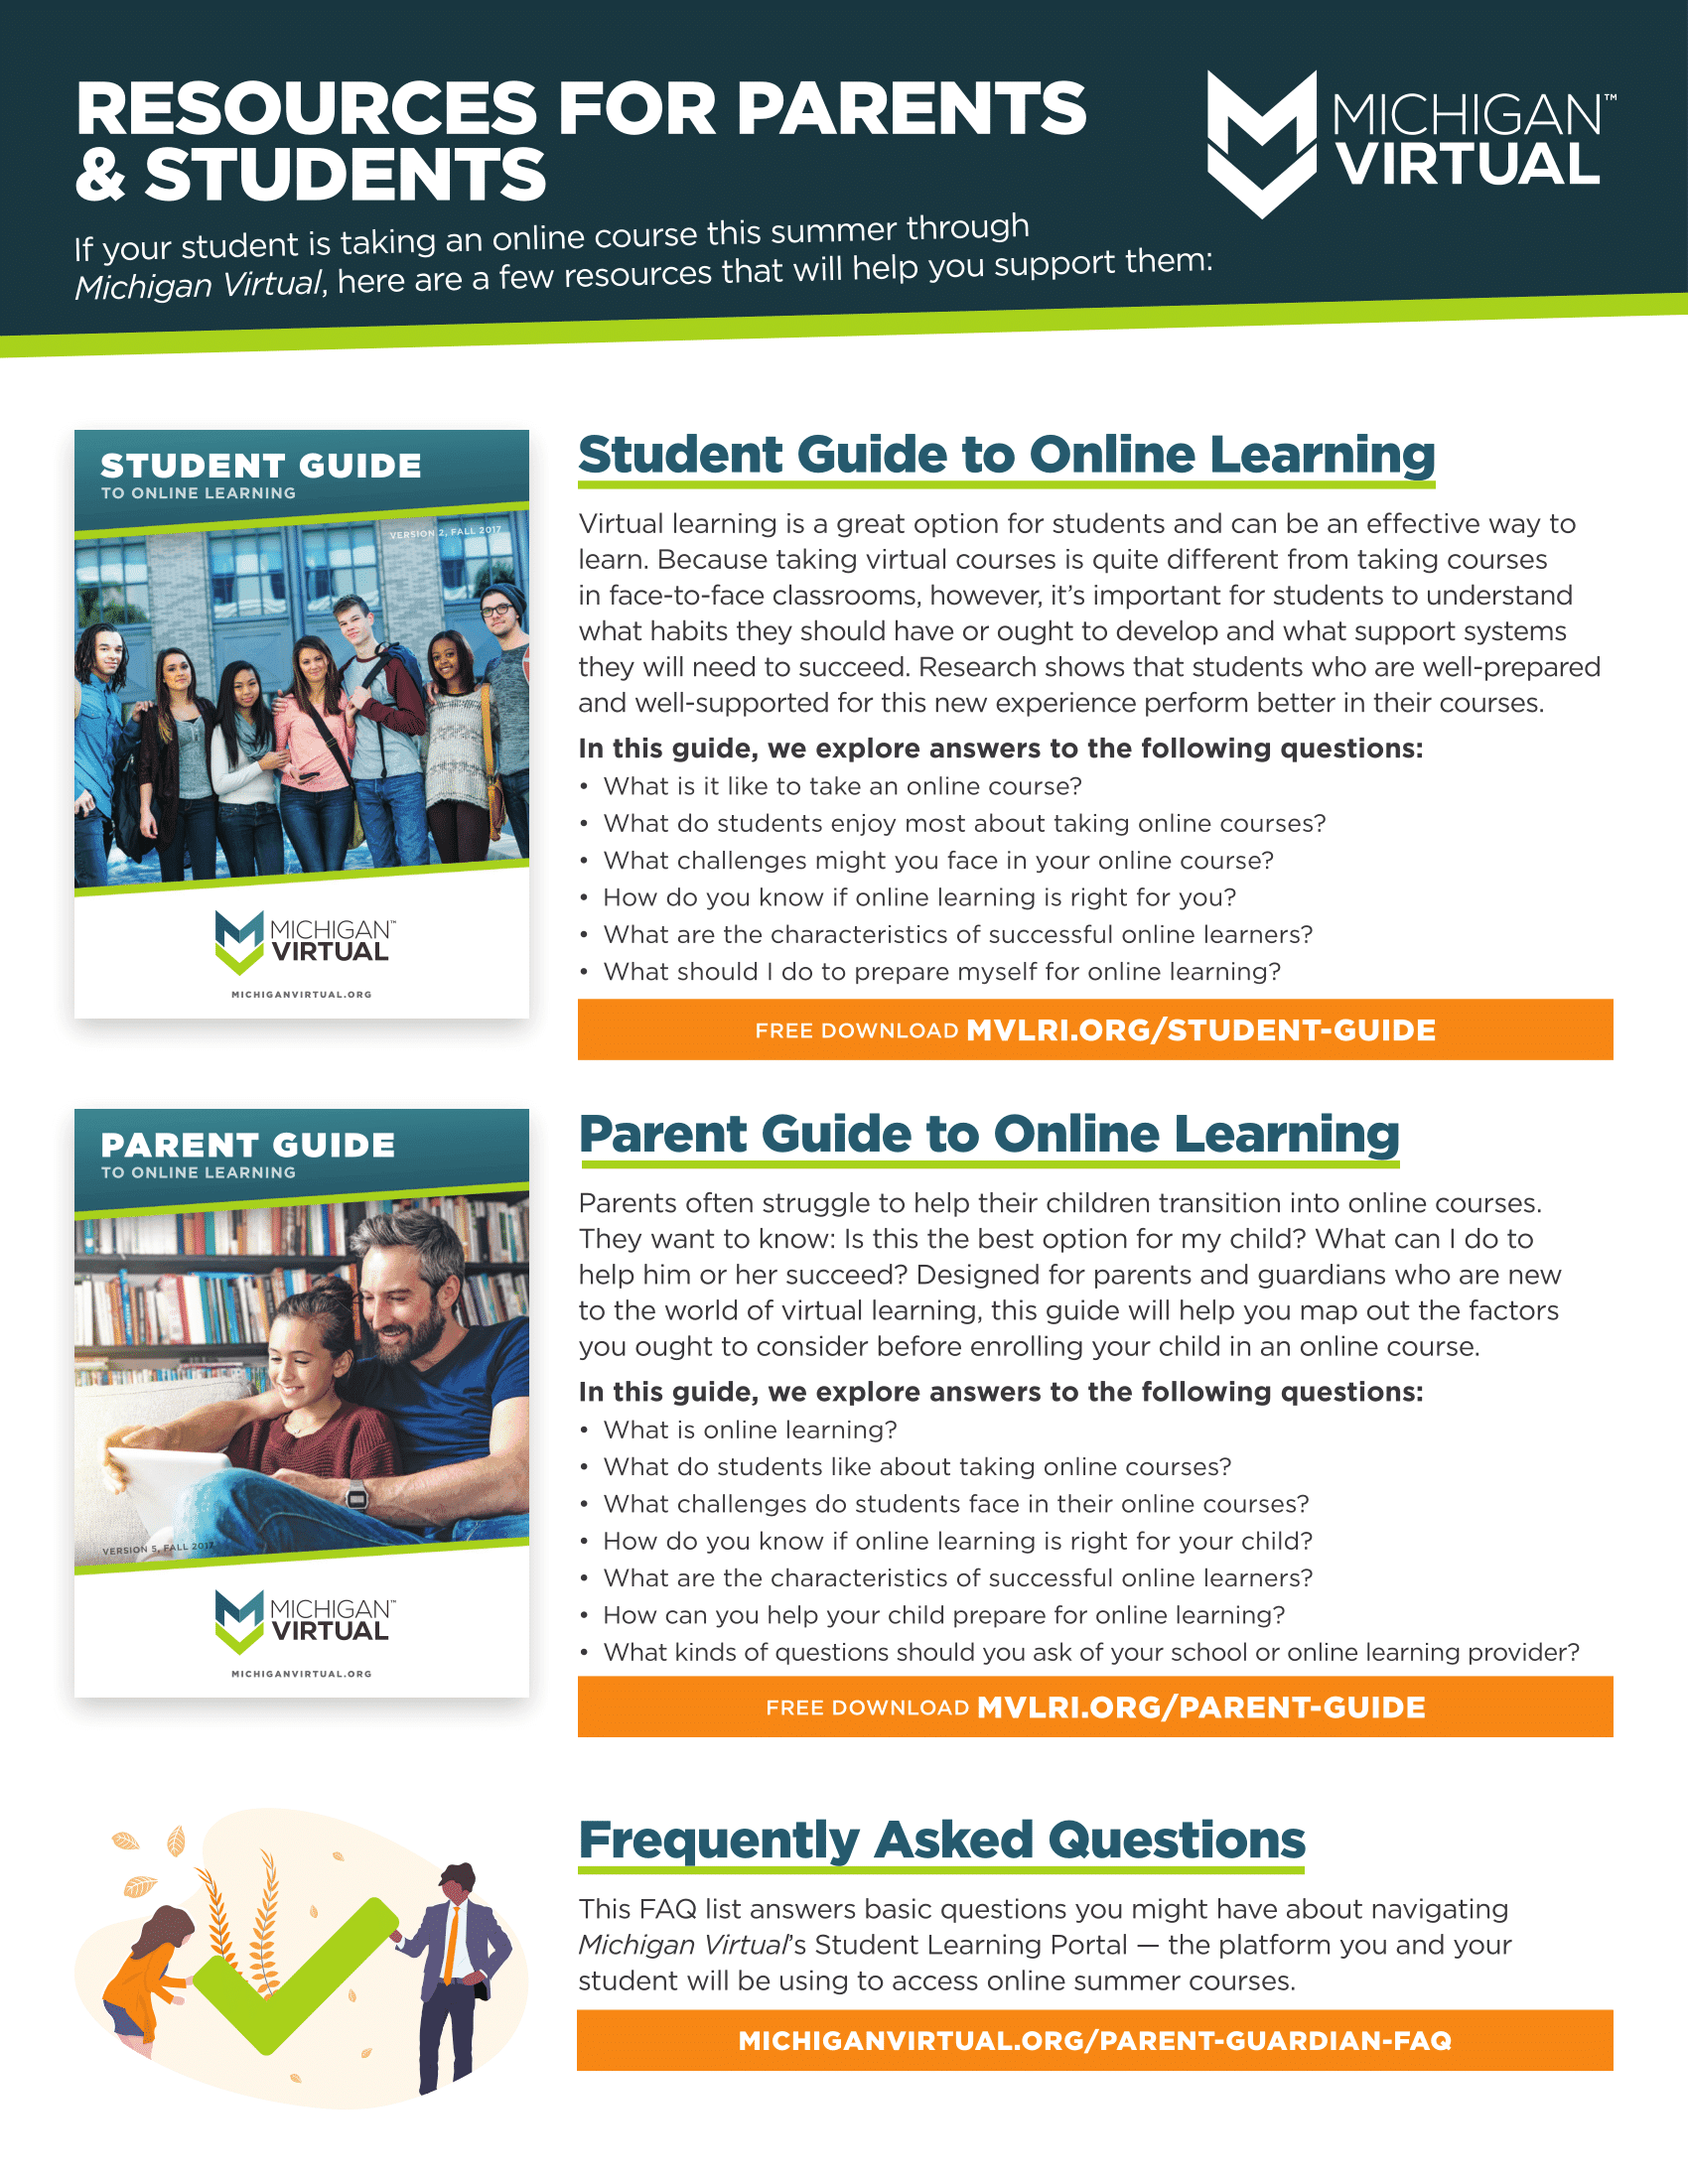 If your student is taking an online course this summer through Michigan Virtual, here are a few free resources that will help you support them: Frequently Asked Questions This FAQ list answers basic questions you might have about navigating Michigan Virtual’s Student Learning Portal — the platform you and your student will be using to access online summer courses. Learn more: https://hubs.ly/H0fy2480 Student Guide to Online Learning Virtual learning is a great option for students and can be an effective way to learn. Because taking virtual courses is quite different from taking courses in face-to-face classrooms, however, it’s important for students to understand what habits they should have or ought to develop and what support systems they will need to succeed. Research shows that students who are well-prepared and well-supported for this new experience perform better in their courses. In this guide, you’ll explore answers to the following questions: What is it like to take an online course? What do students enjoy most about taking online courses? What challenges might you face in your online course? What are the characteristics of successful online learners? What should I do to prepare myself for online learning? Free download: https://hubs.ly/H0fy3Xk0 Parent Guide to Online Learning Parents often struggle to help their children transition into online courses. They want to know: Is this the best option for my child? What can I do to help him or her succeed? Designed for parents and guardians who are new to the world of virtual learning, this guide will help you map out the factors you ought to consider before enrolling your child in an online course. In this guide, we explore answers to the following questions: What is online learning? What do students like about taking online courses? What challenges do students face in their online courses? What are the characteristics of successful online learners? How can you help your child prepare for online learning? Free download: https://hubs.ly/H0fy3zJ0